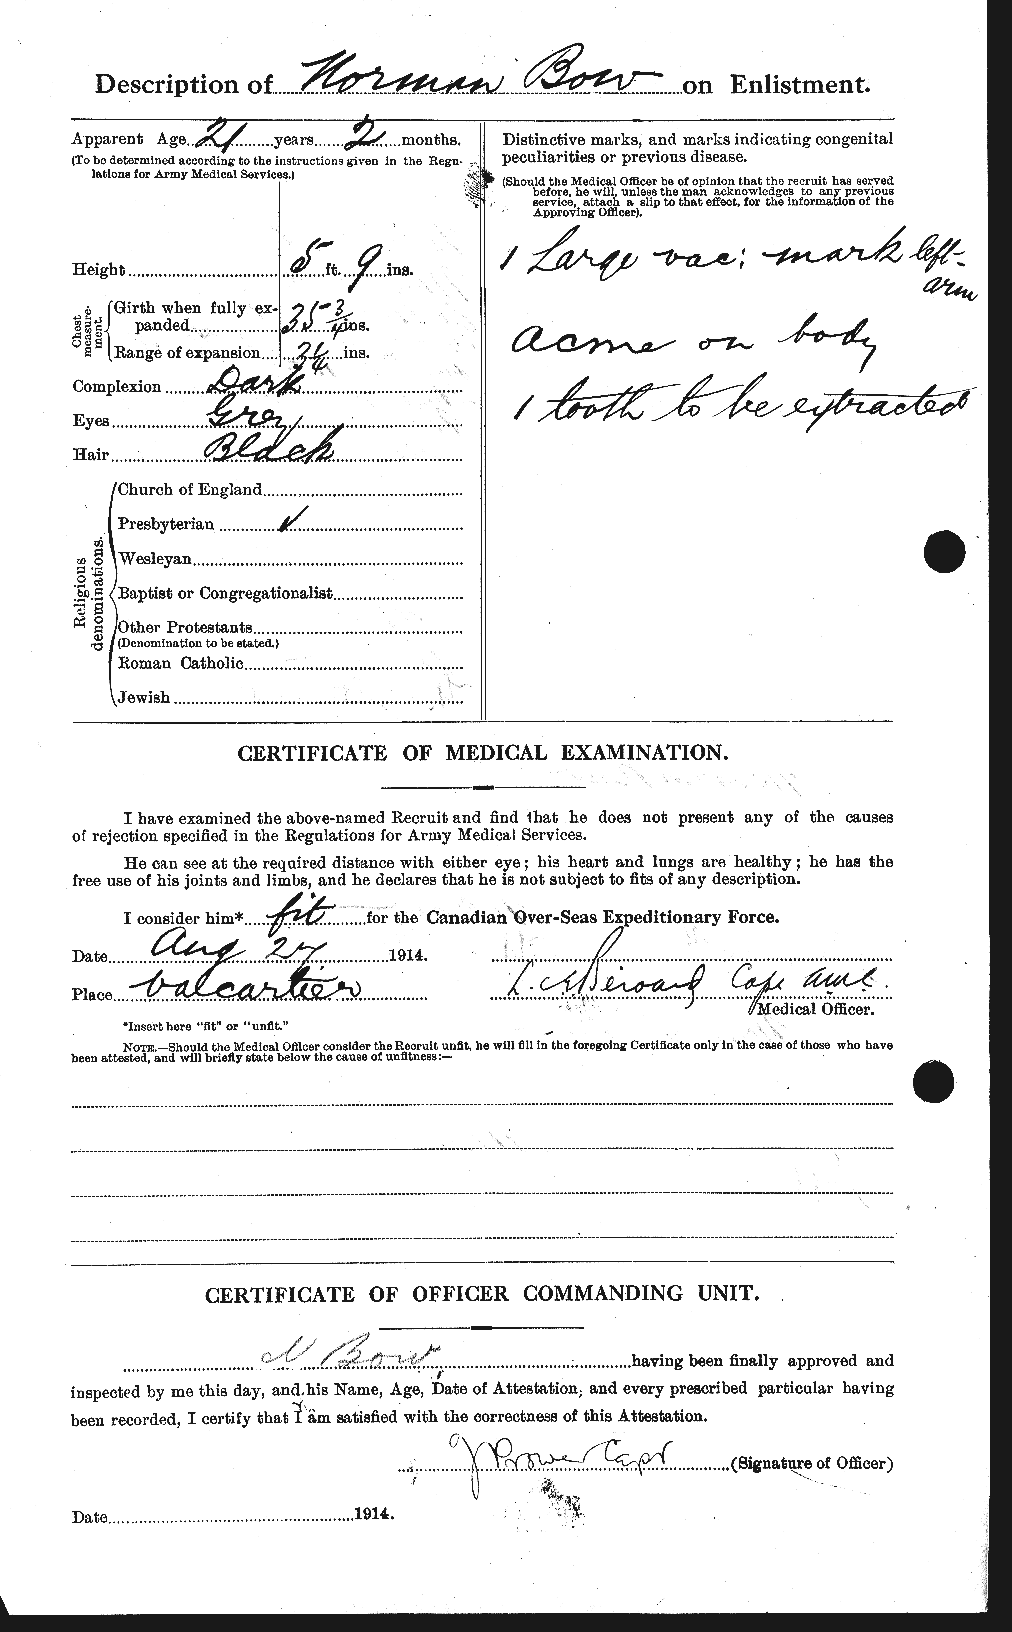 Personnel Records of the First World War - CEF 254511b